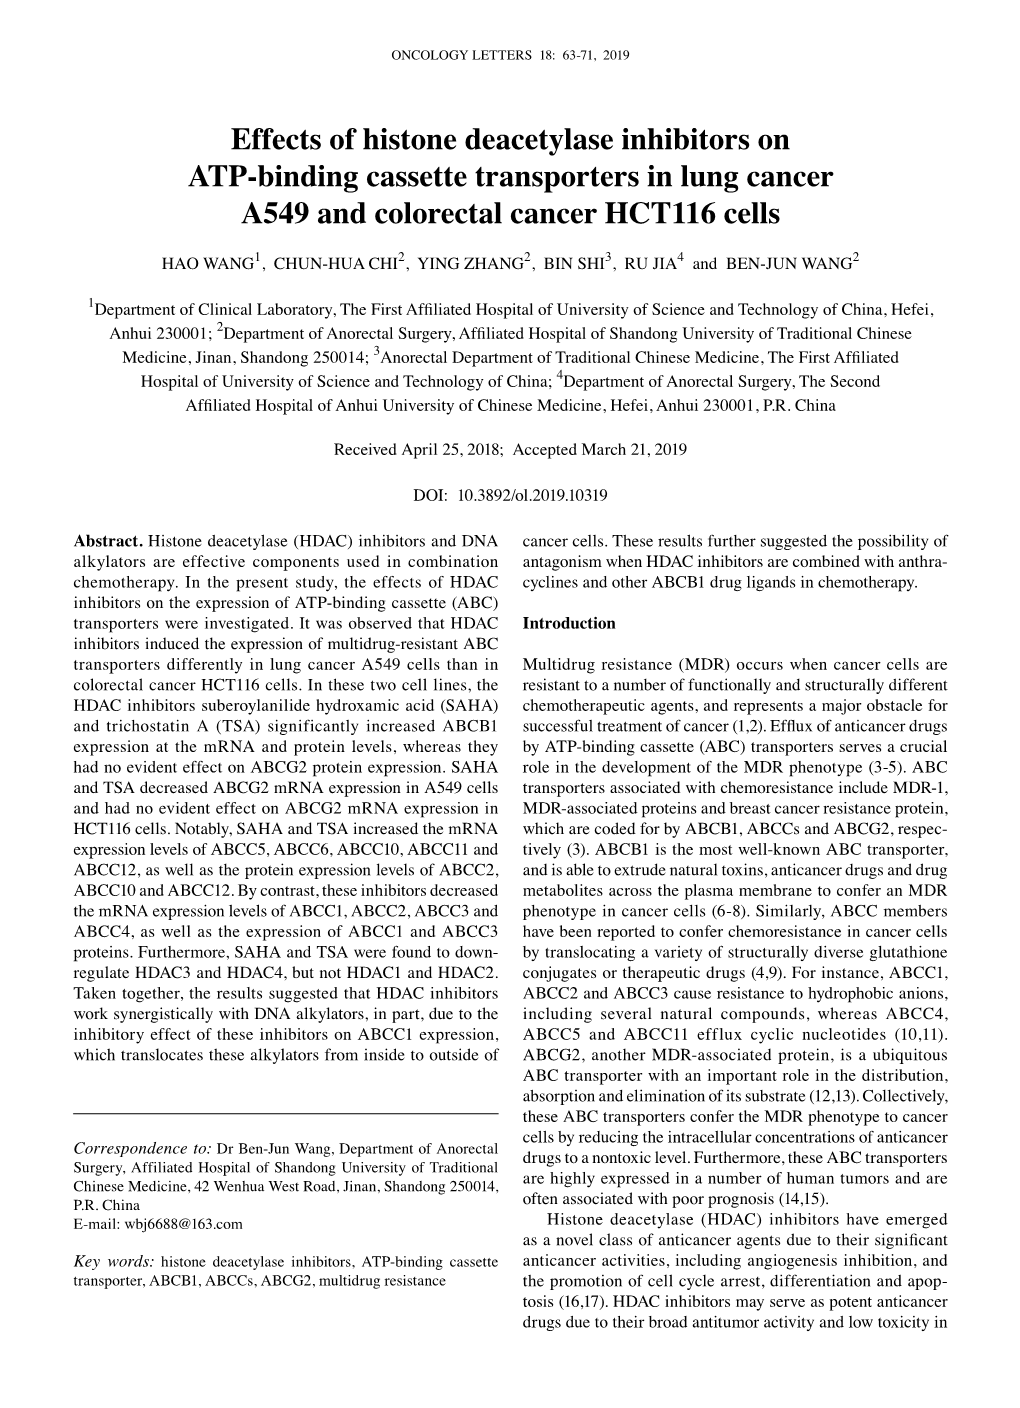 Effects of Histone Deacetylase Inhibitors on ATP‑Binding Cassette Transporters in Lung Cancer A549 and Colorectal Cancer HCT116 Cells